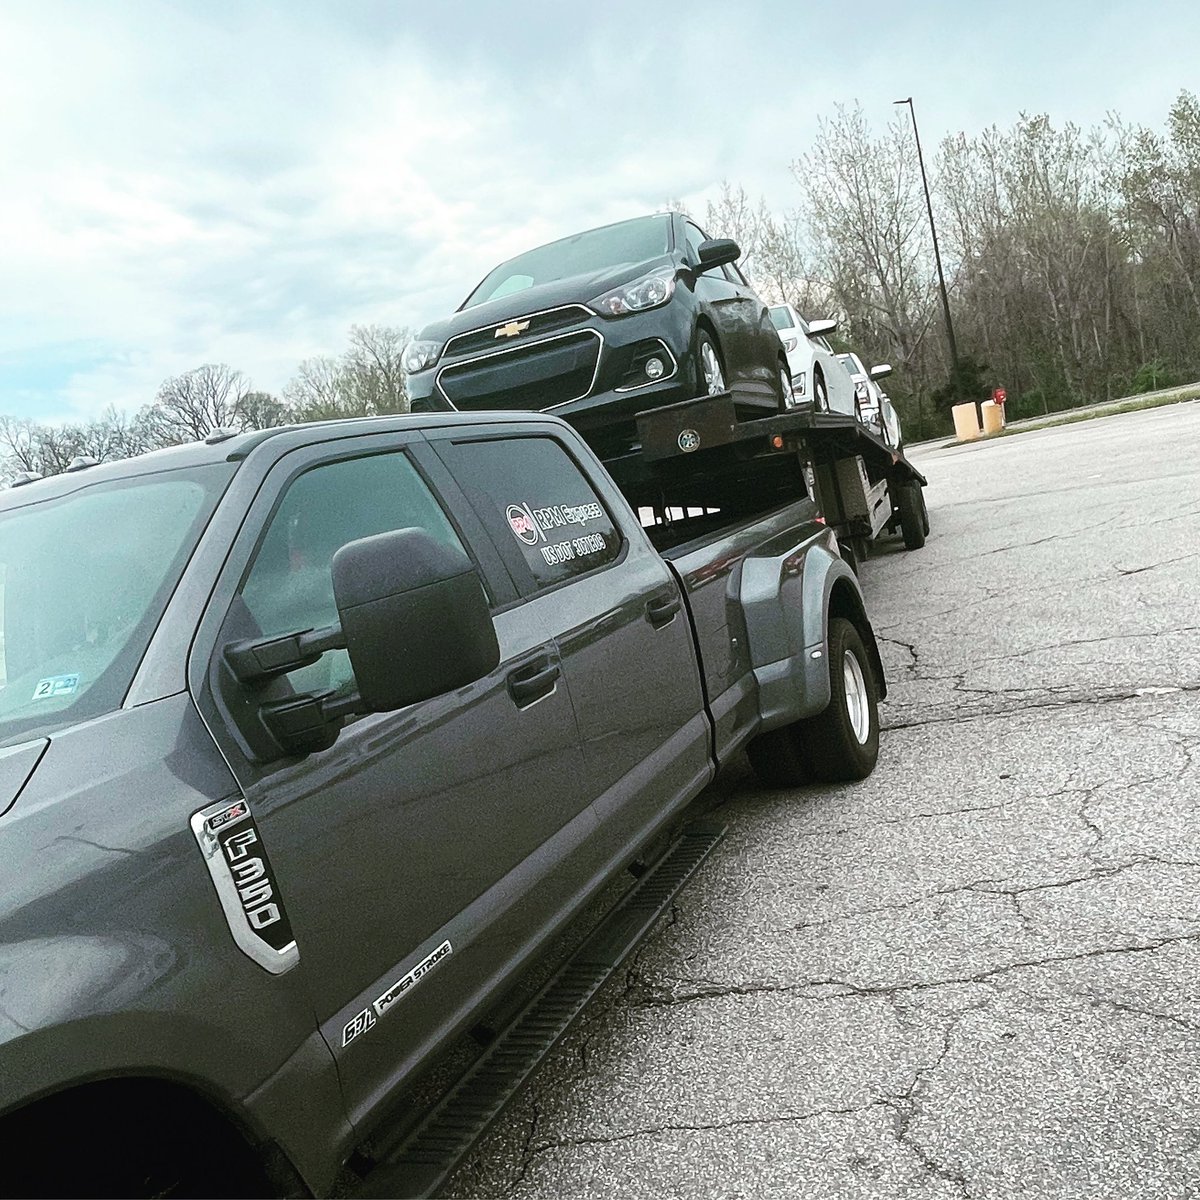 Your cars, our commitment – a journey towards trust and quality service! 🌟 Start your car shipping adventure today. Get a FREE quote at AVFTS.COM and let's roll! 🚚💨

#avfts #carshipping #ontheroadagain #trustedservice #movemycar